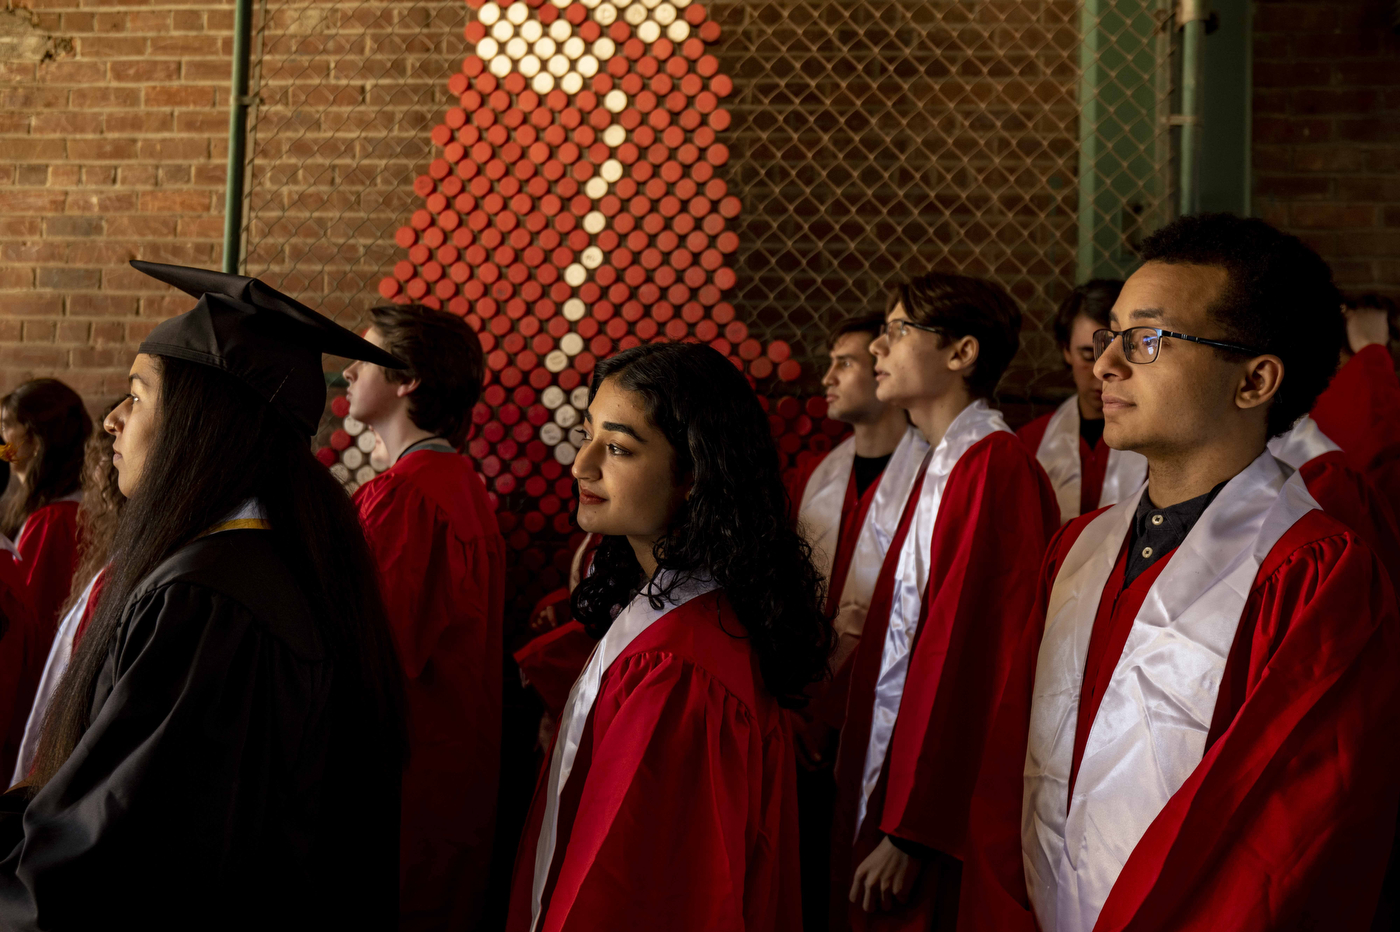 students lined up to walk out into Fenway Park for commencement